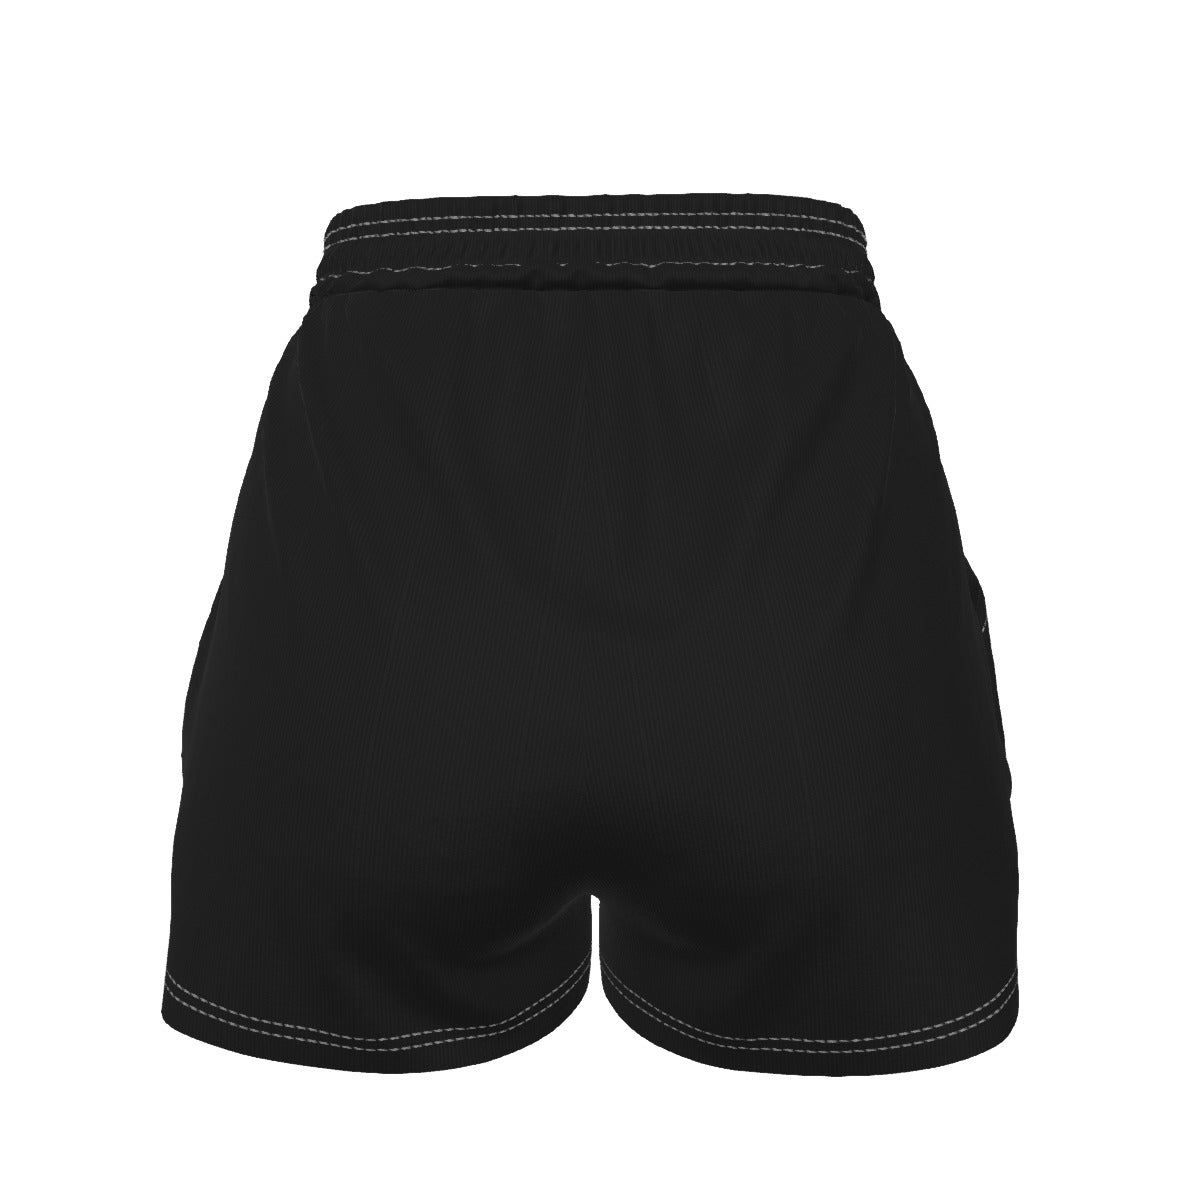 Simply Ruthless Women's Shorts